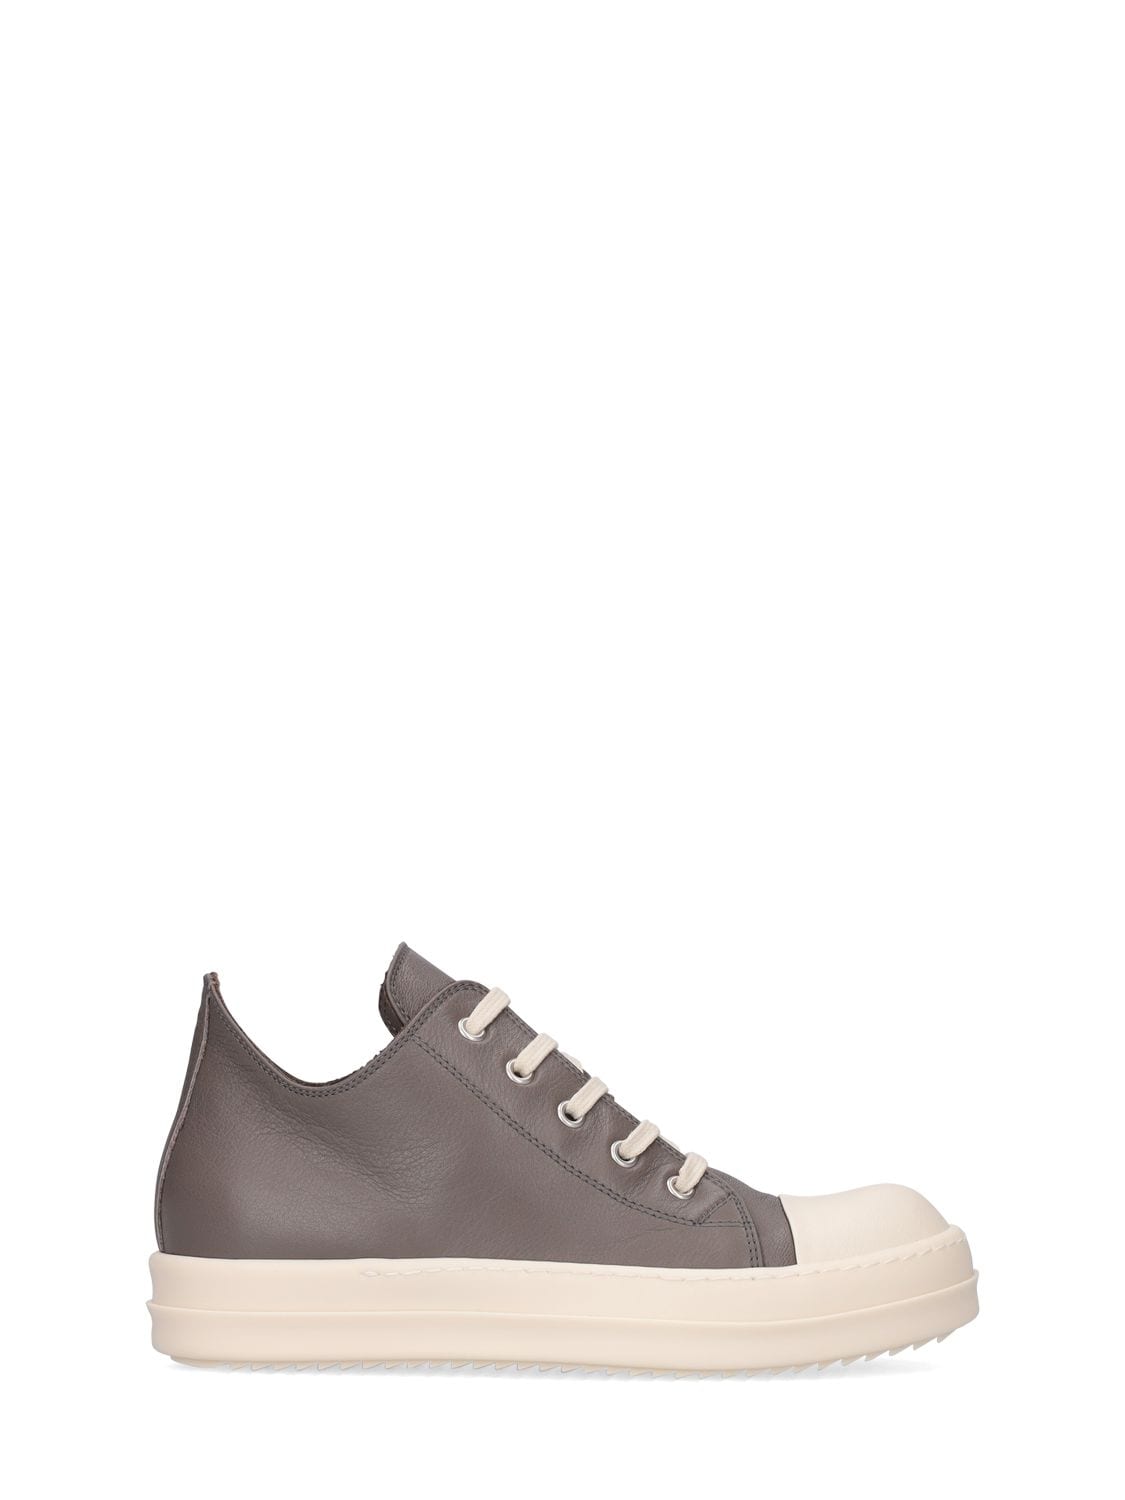 RICK OWENS LEATHER LOW SNEAKERS